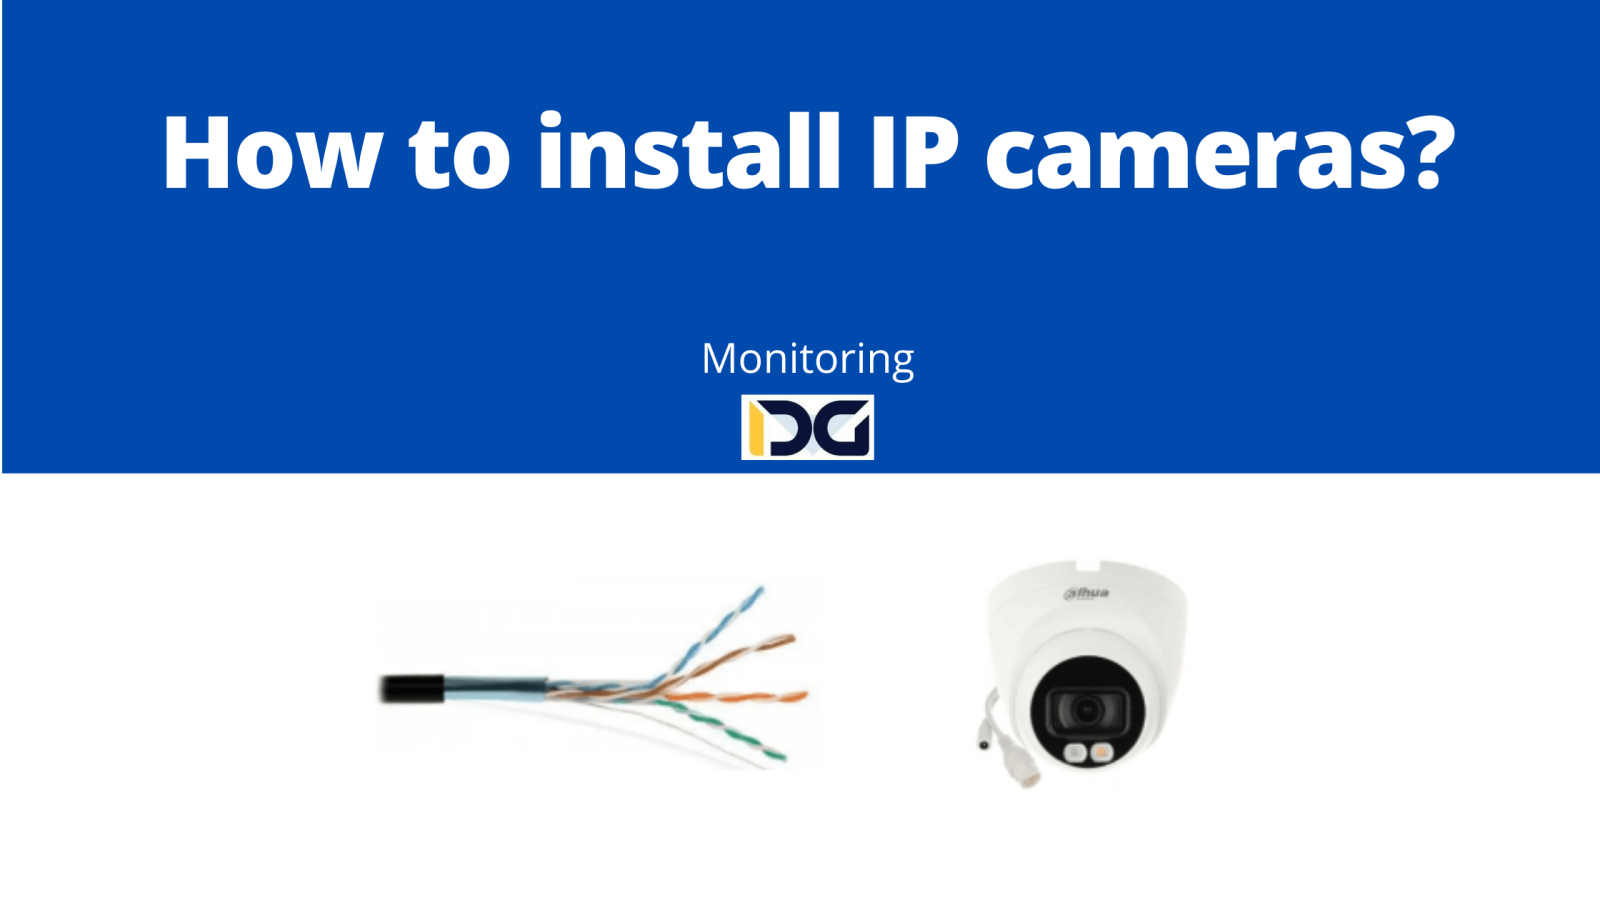 How to install IP cameras?